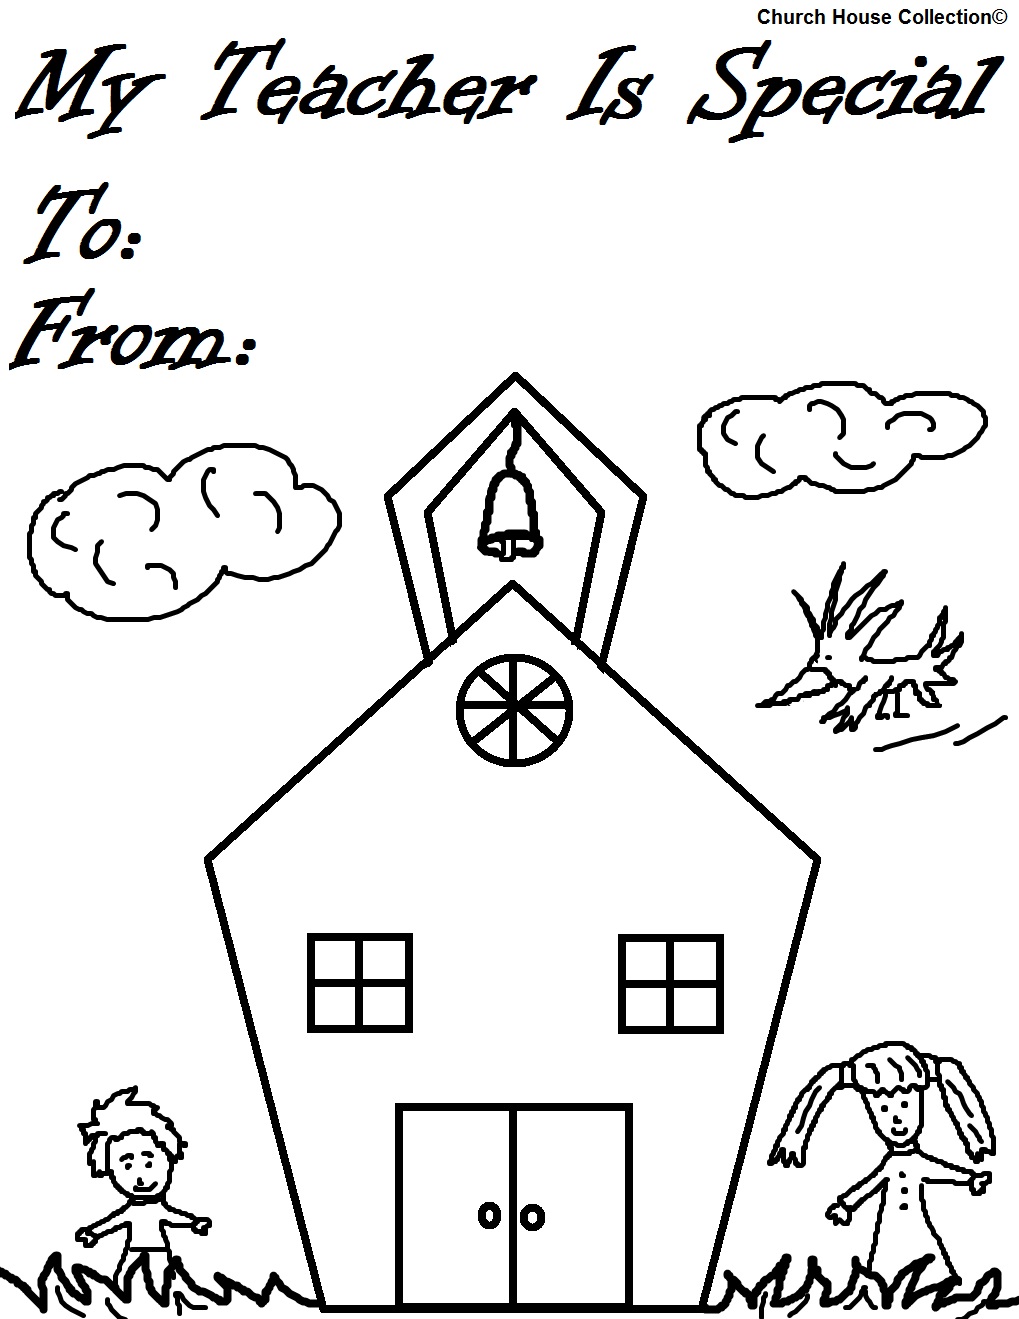 Church House Collection Blog: My Teacher Is Special Coloring Pages